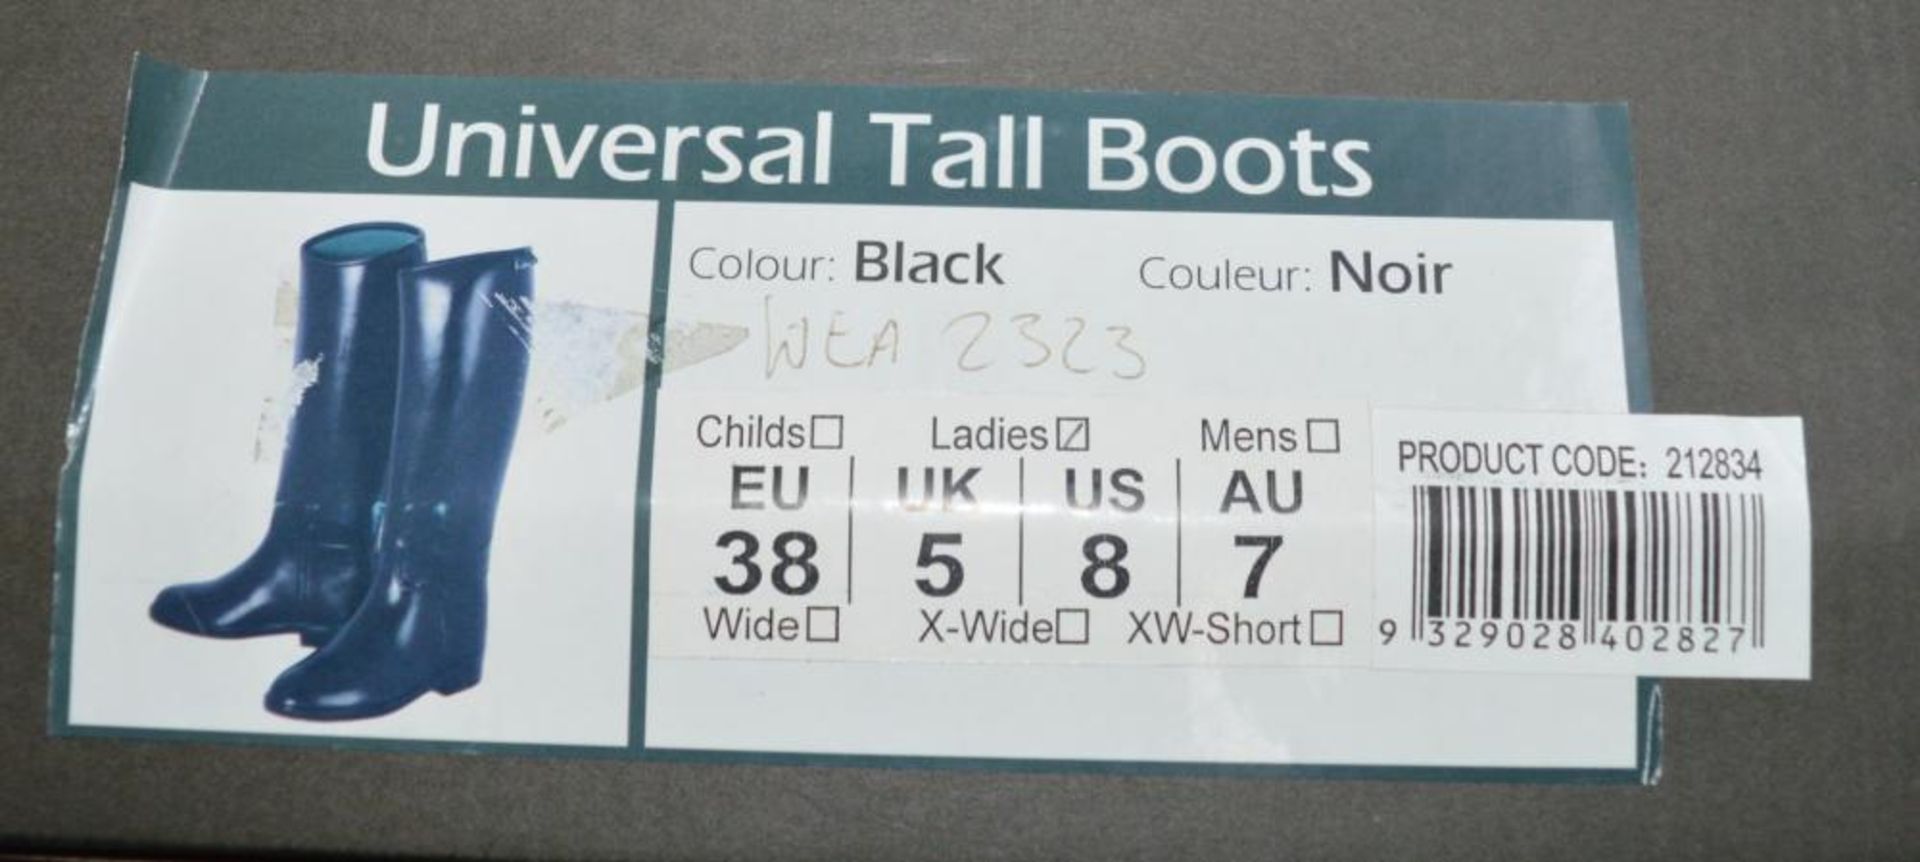 1 x&nbsp;Dublin Universal Tall Waterproof Horse Riding Boots - Black Ladies Size 5 (UK) - New Sto - Image 4 of 4